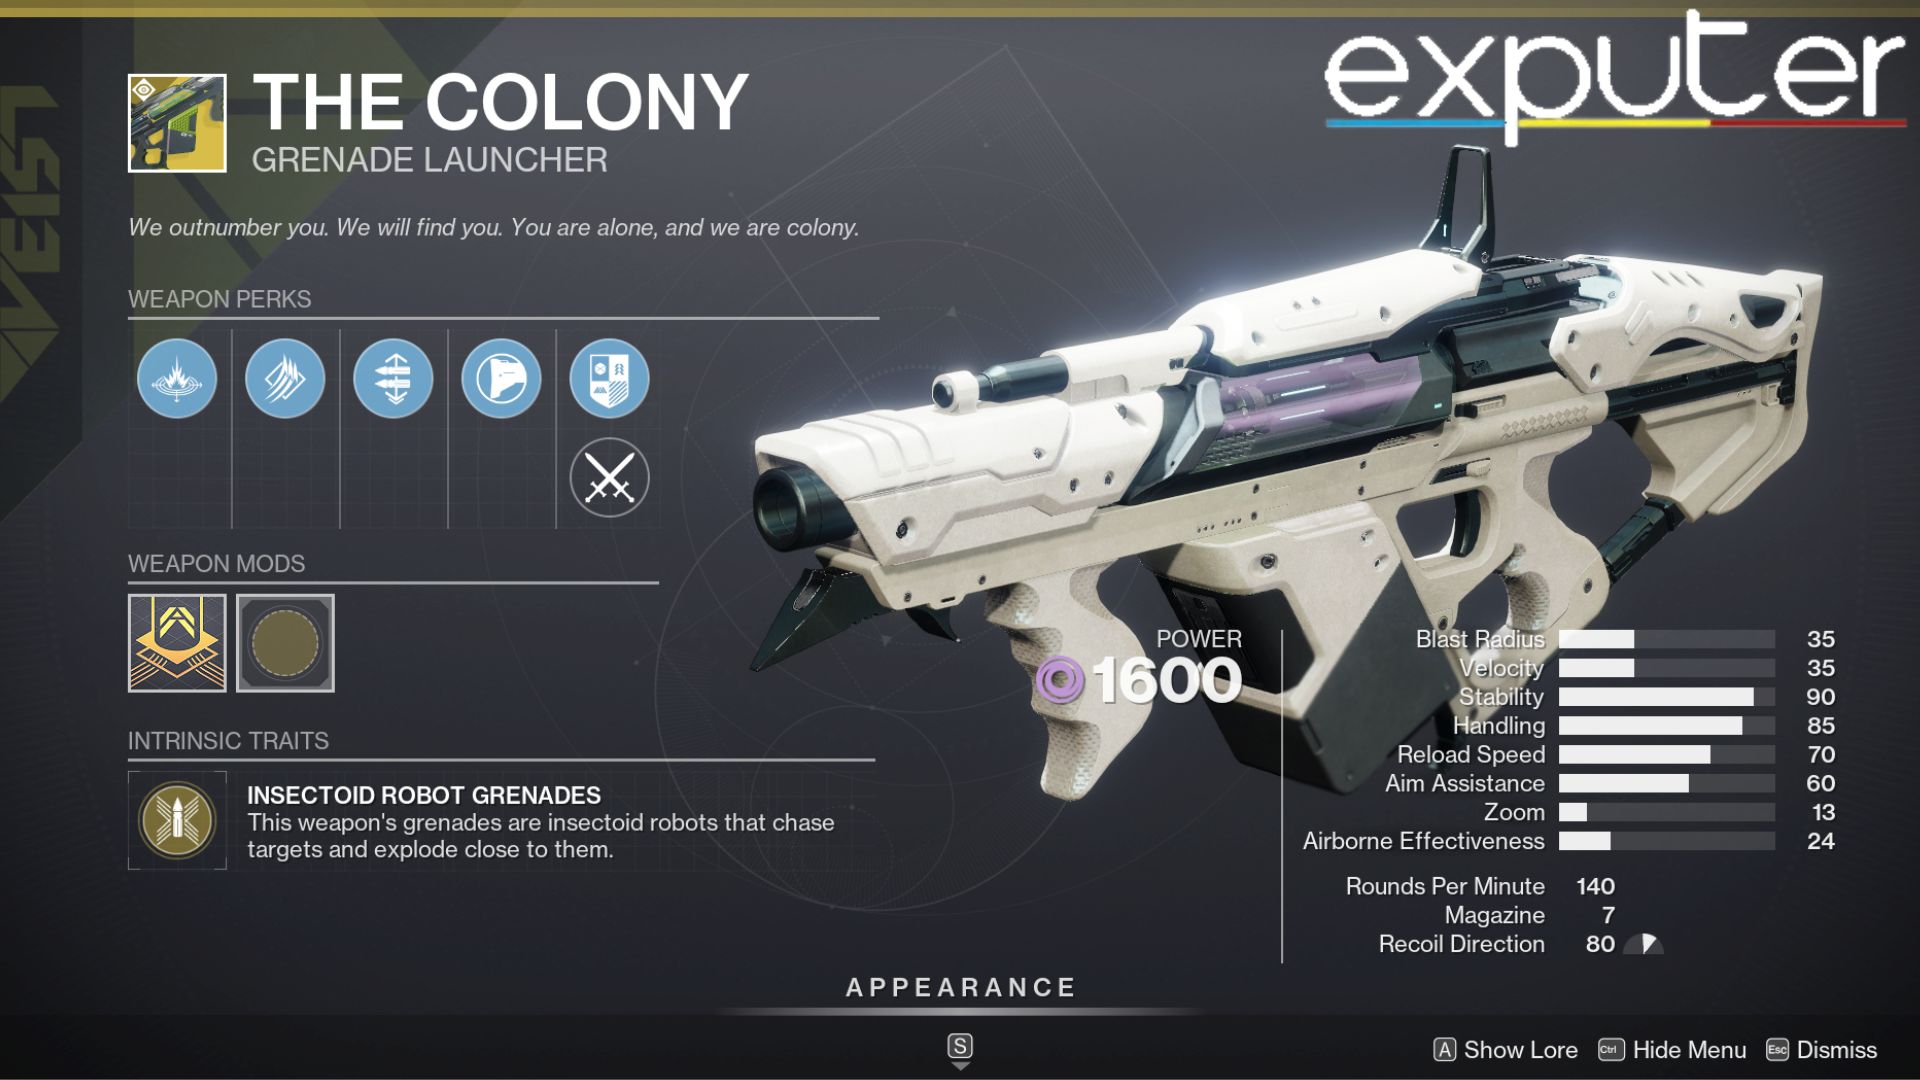 The Colony exotic grenade launcher